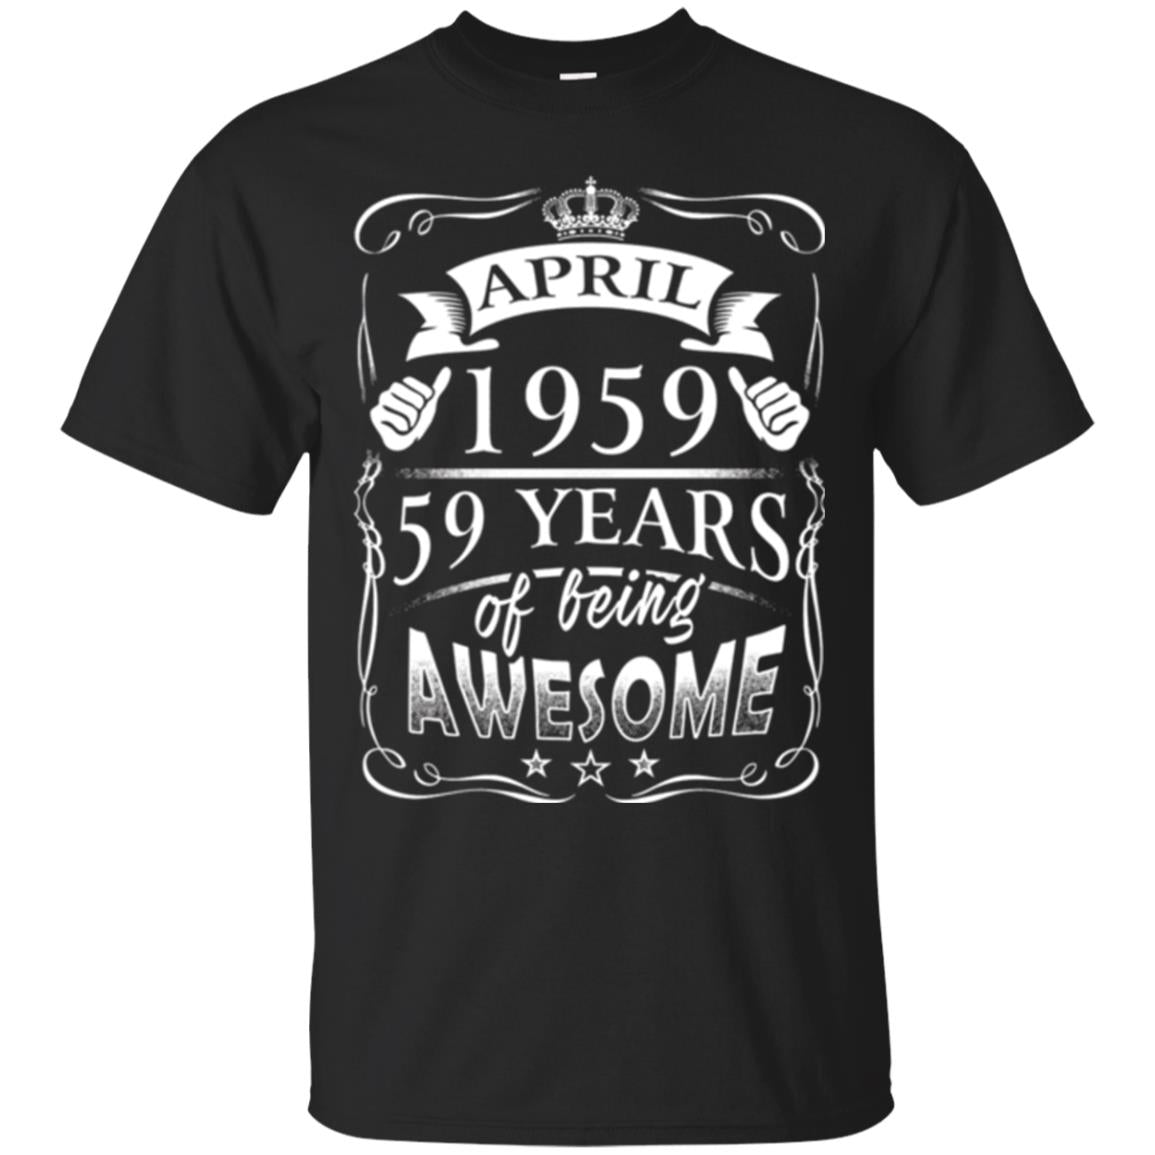 59th Birthday T-shirt April 1959 59 Years Of Being Awesome